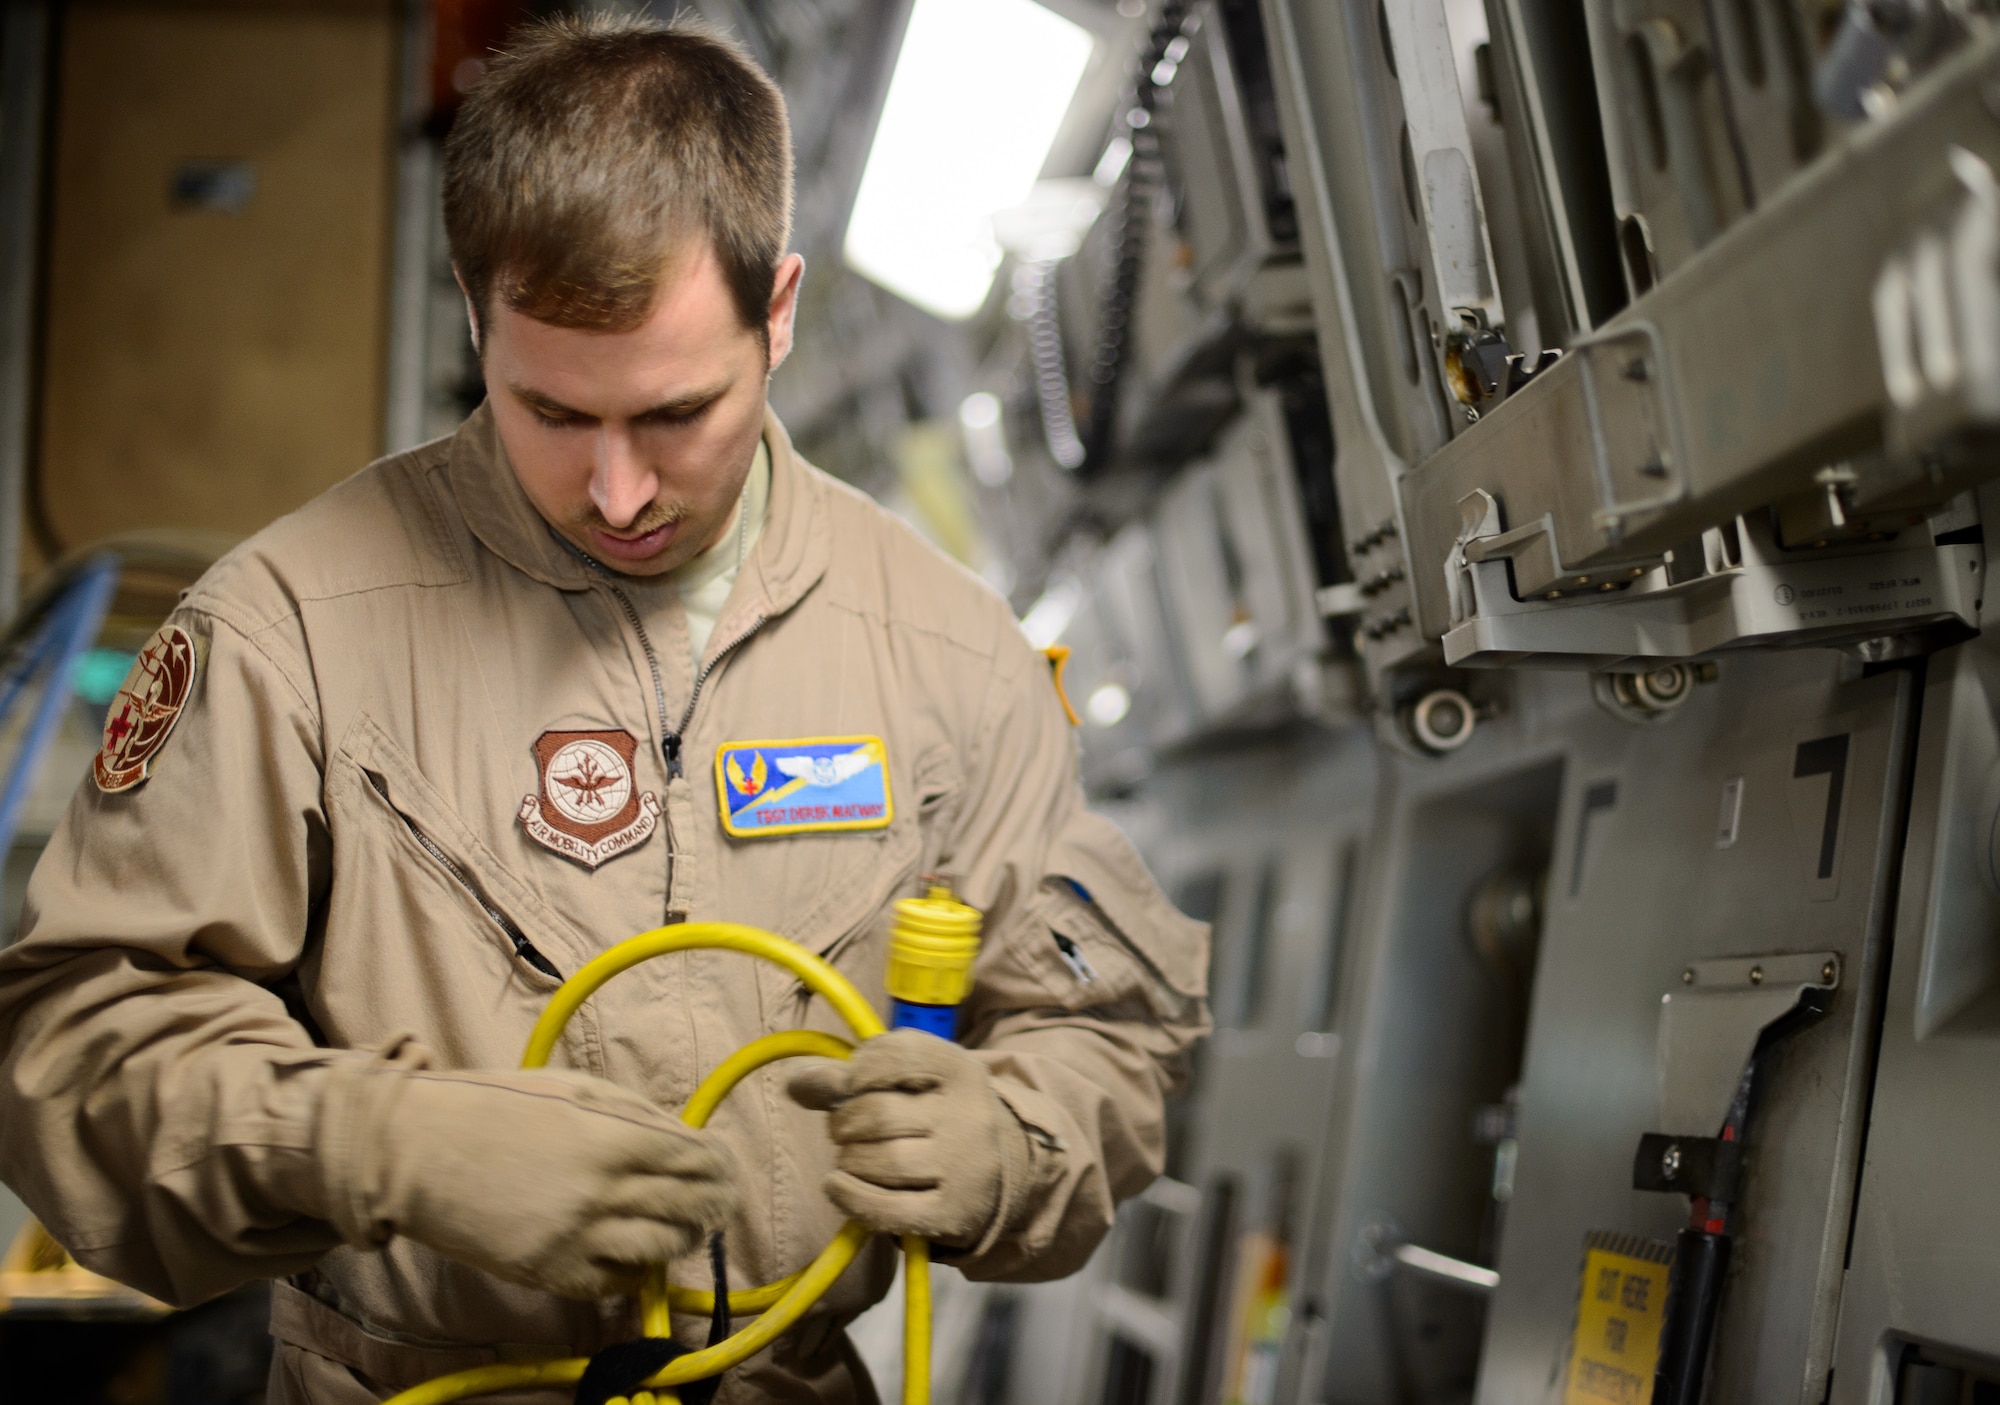 Tech. Sgt. Derek Matway, 10th Expeditionary Aeromedical Evacuation Flight technician, configures power for medical equipment Nov. 10, 2015, at Ramstein Air Base, Germany. Aeromedical evacuation Airmen can use a variety of aircraft in the Air Force arsenal to get the injured home and save lives. The aircraft powers the equipment needed to treat all types of injuries mid-flight. (U.S. Air Force photo/Staff Sgt. Armando A. Schwier-Morales)